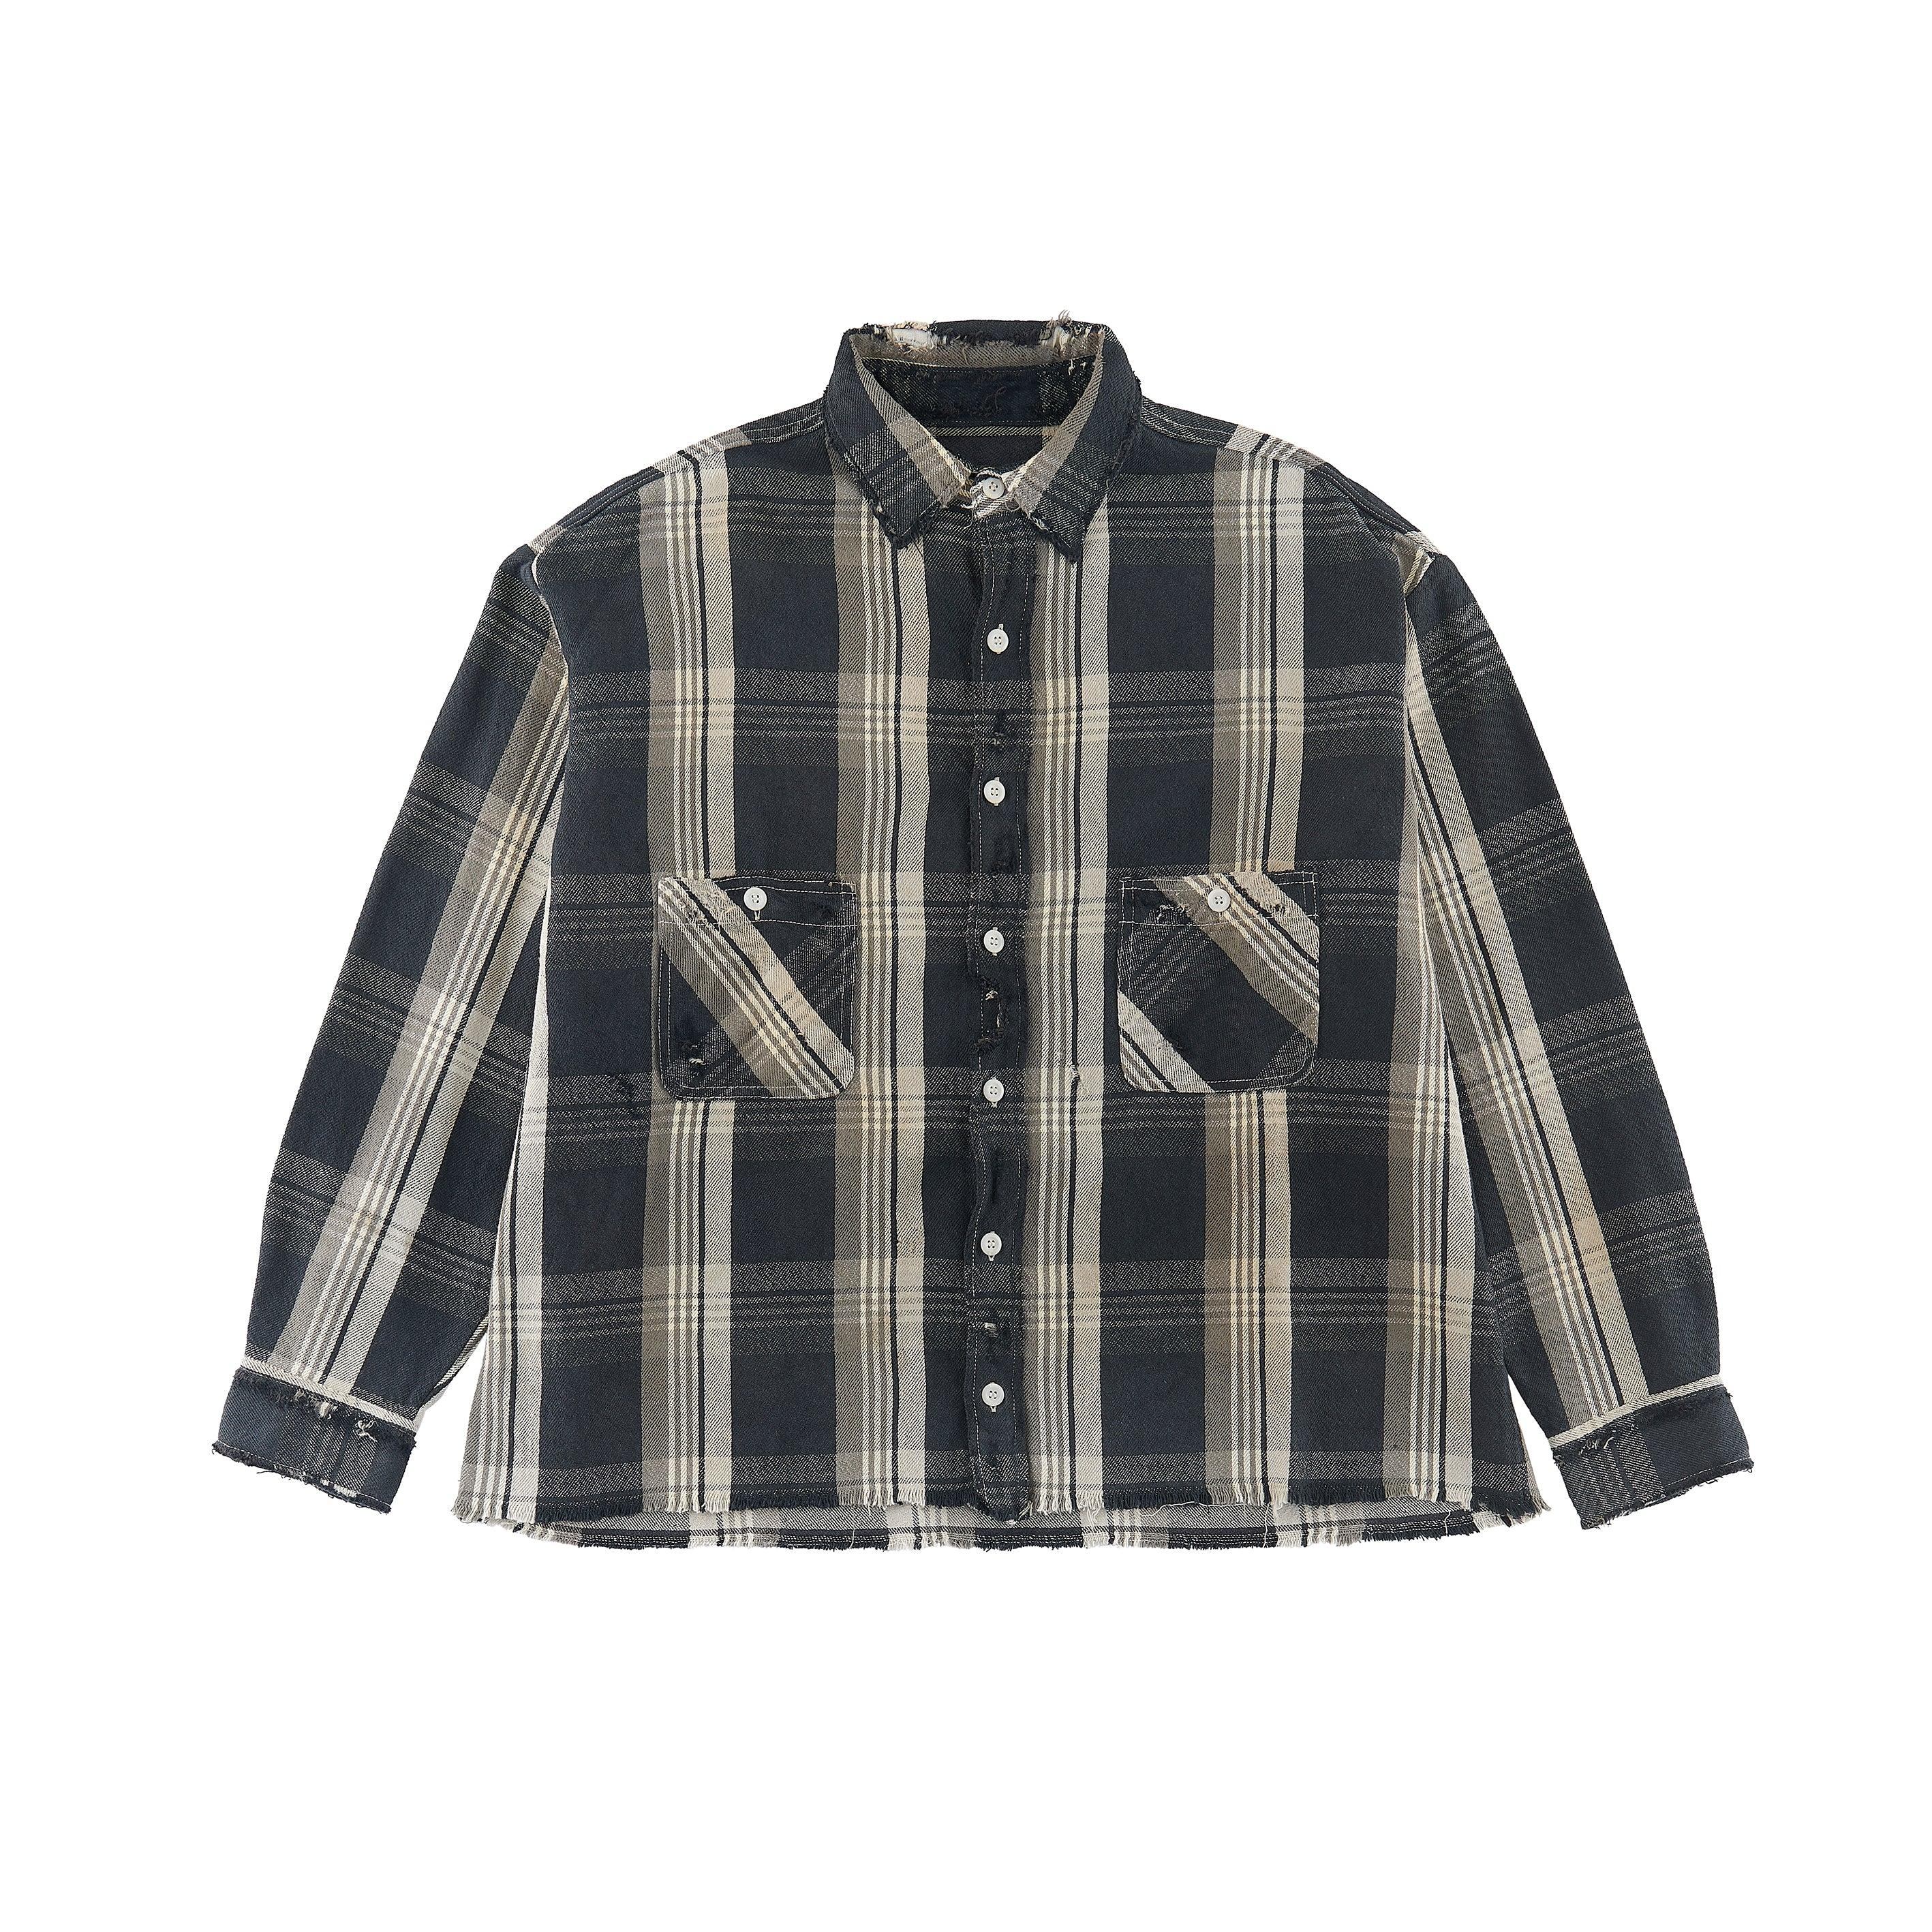 Saint Michael Distressed Flannel Shirt in Black for Men | Lyst